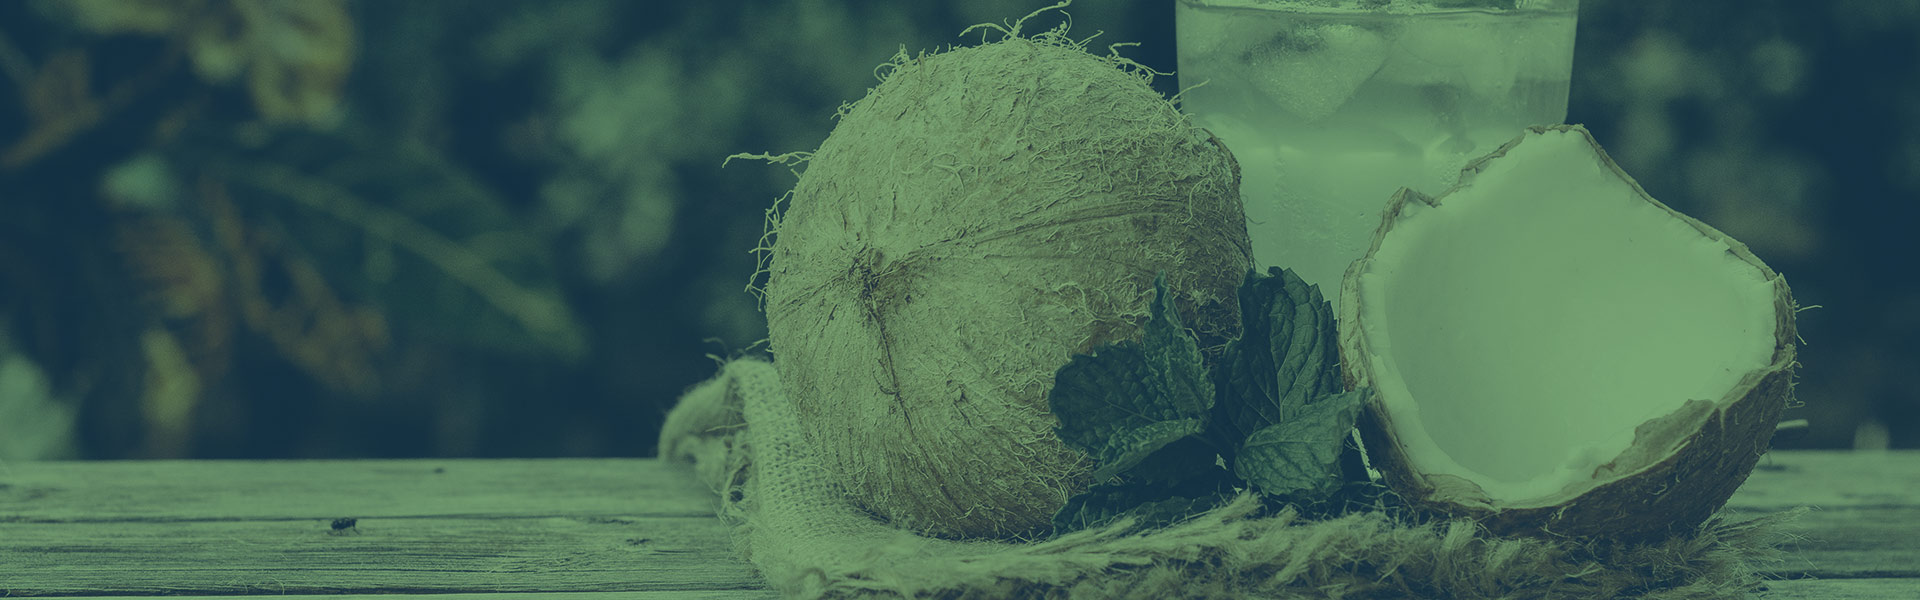 Coconut Production & Its Industrial Uses